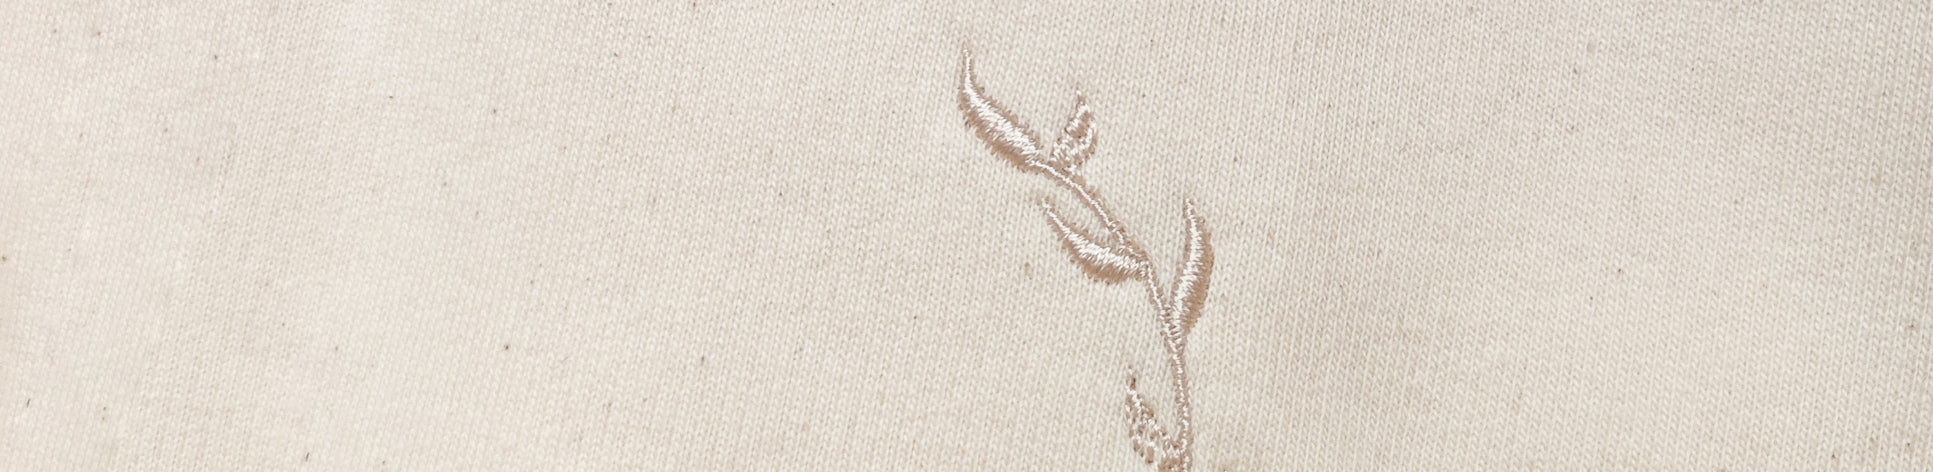 Natural Raw Undyed Fabric Details